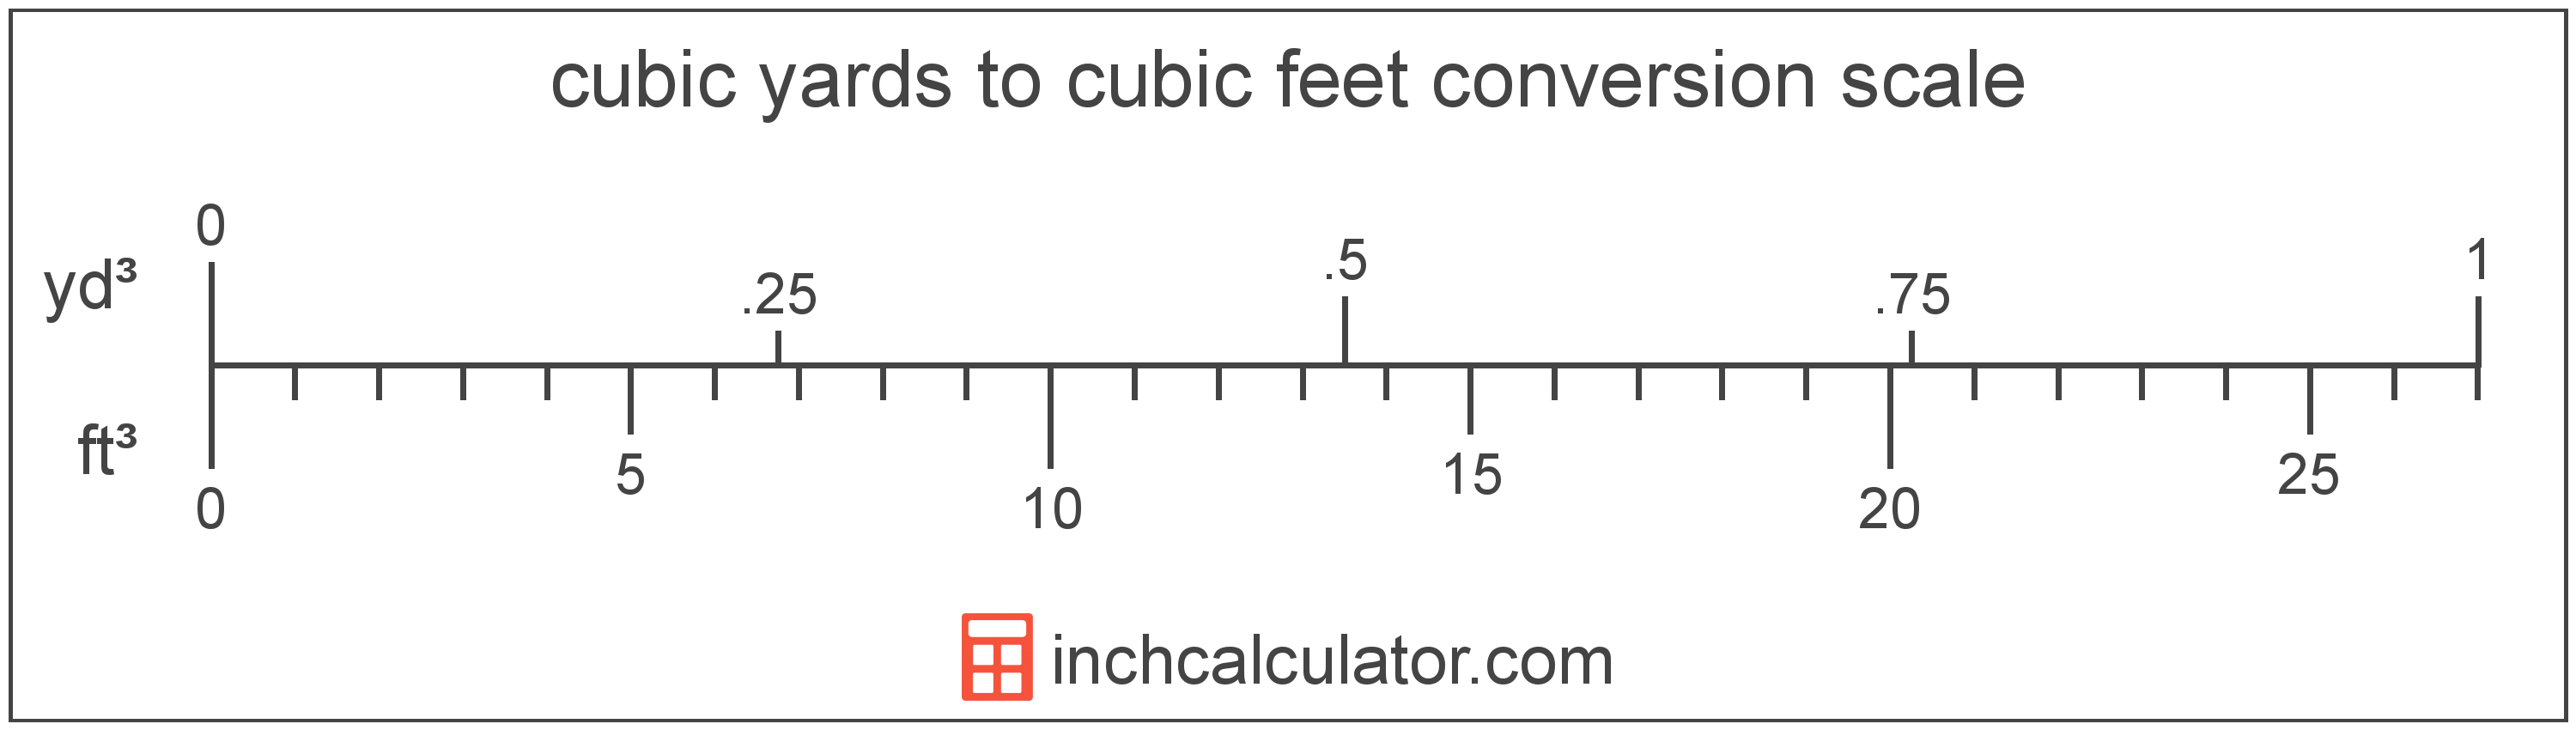 conversion scale showing cubic feet and equivalent cubic yards volume values